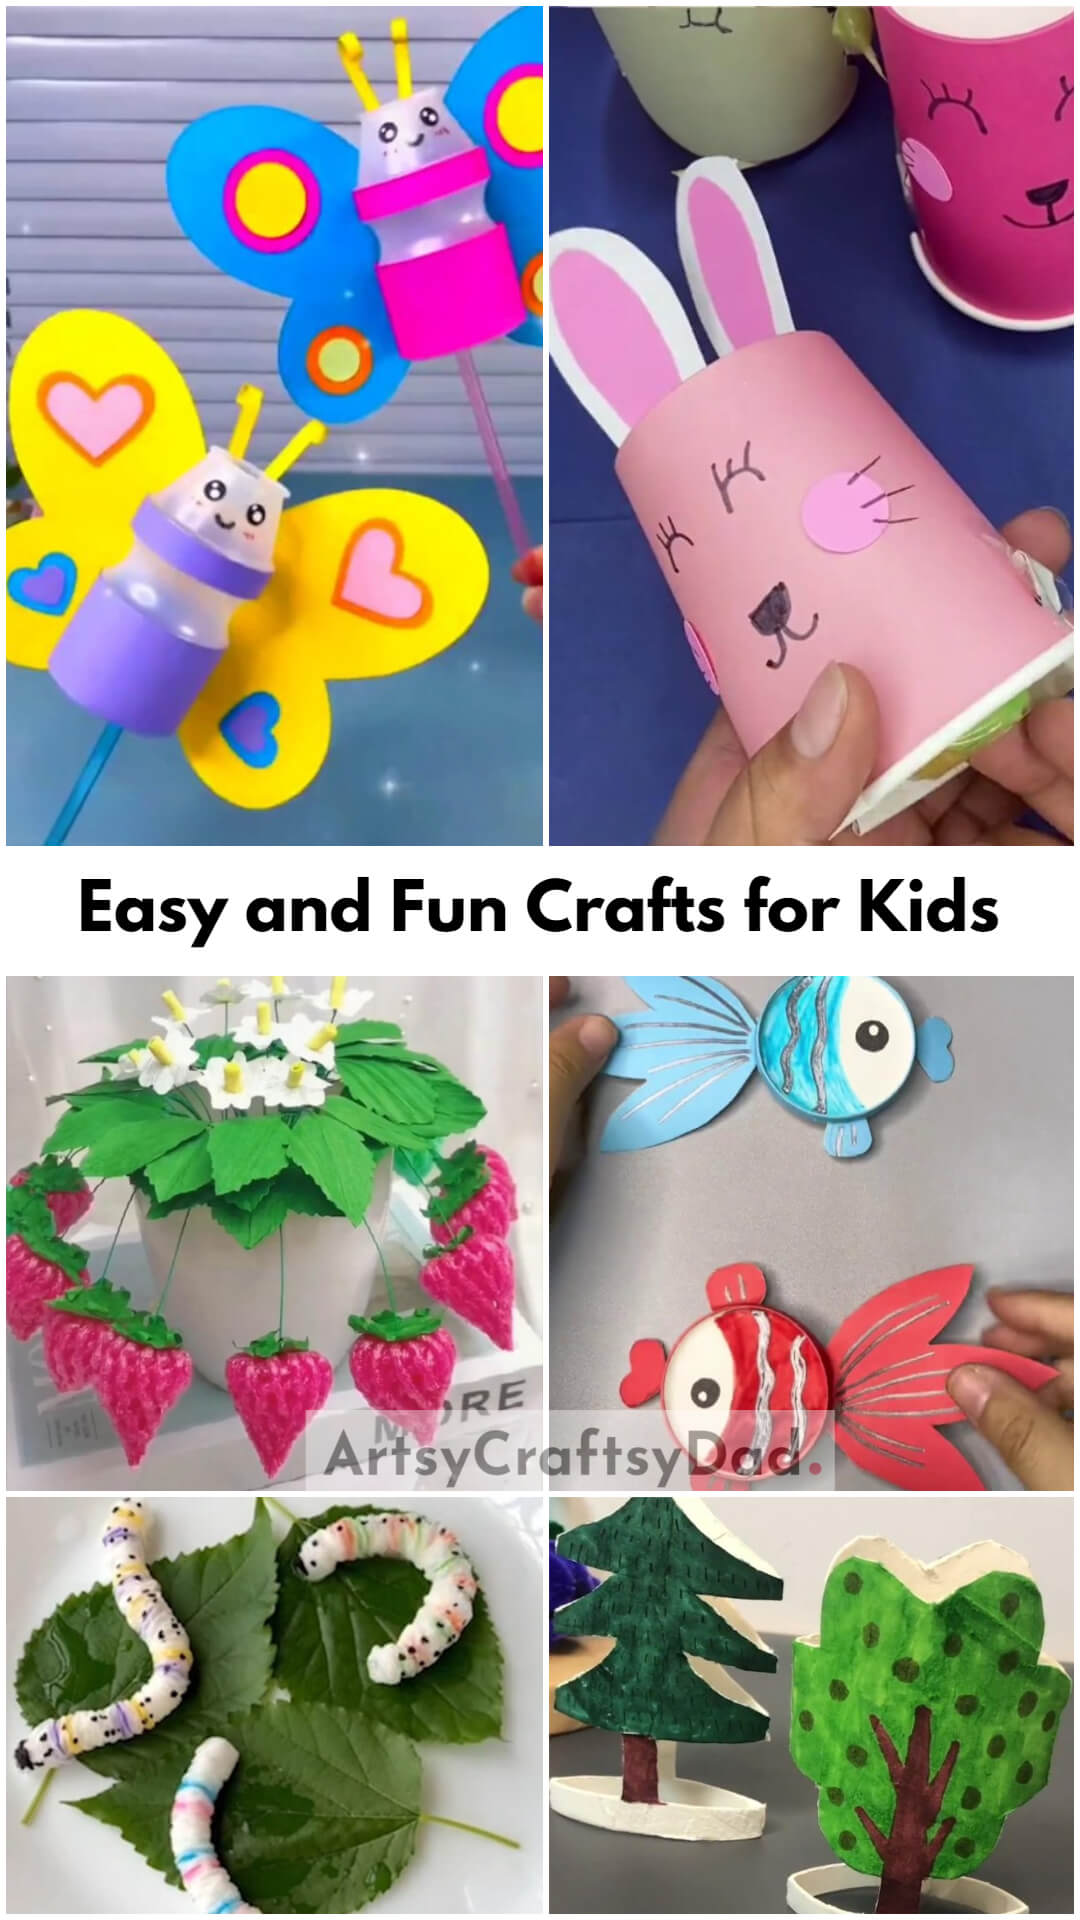 Easy and Fun Crafts for Kids Using Upcycled Materials